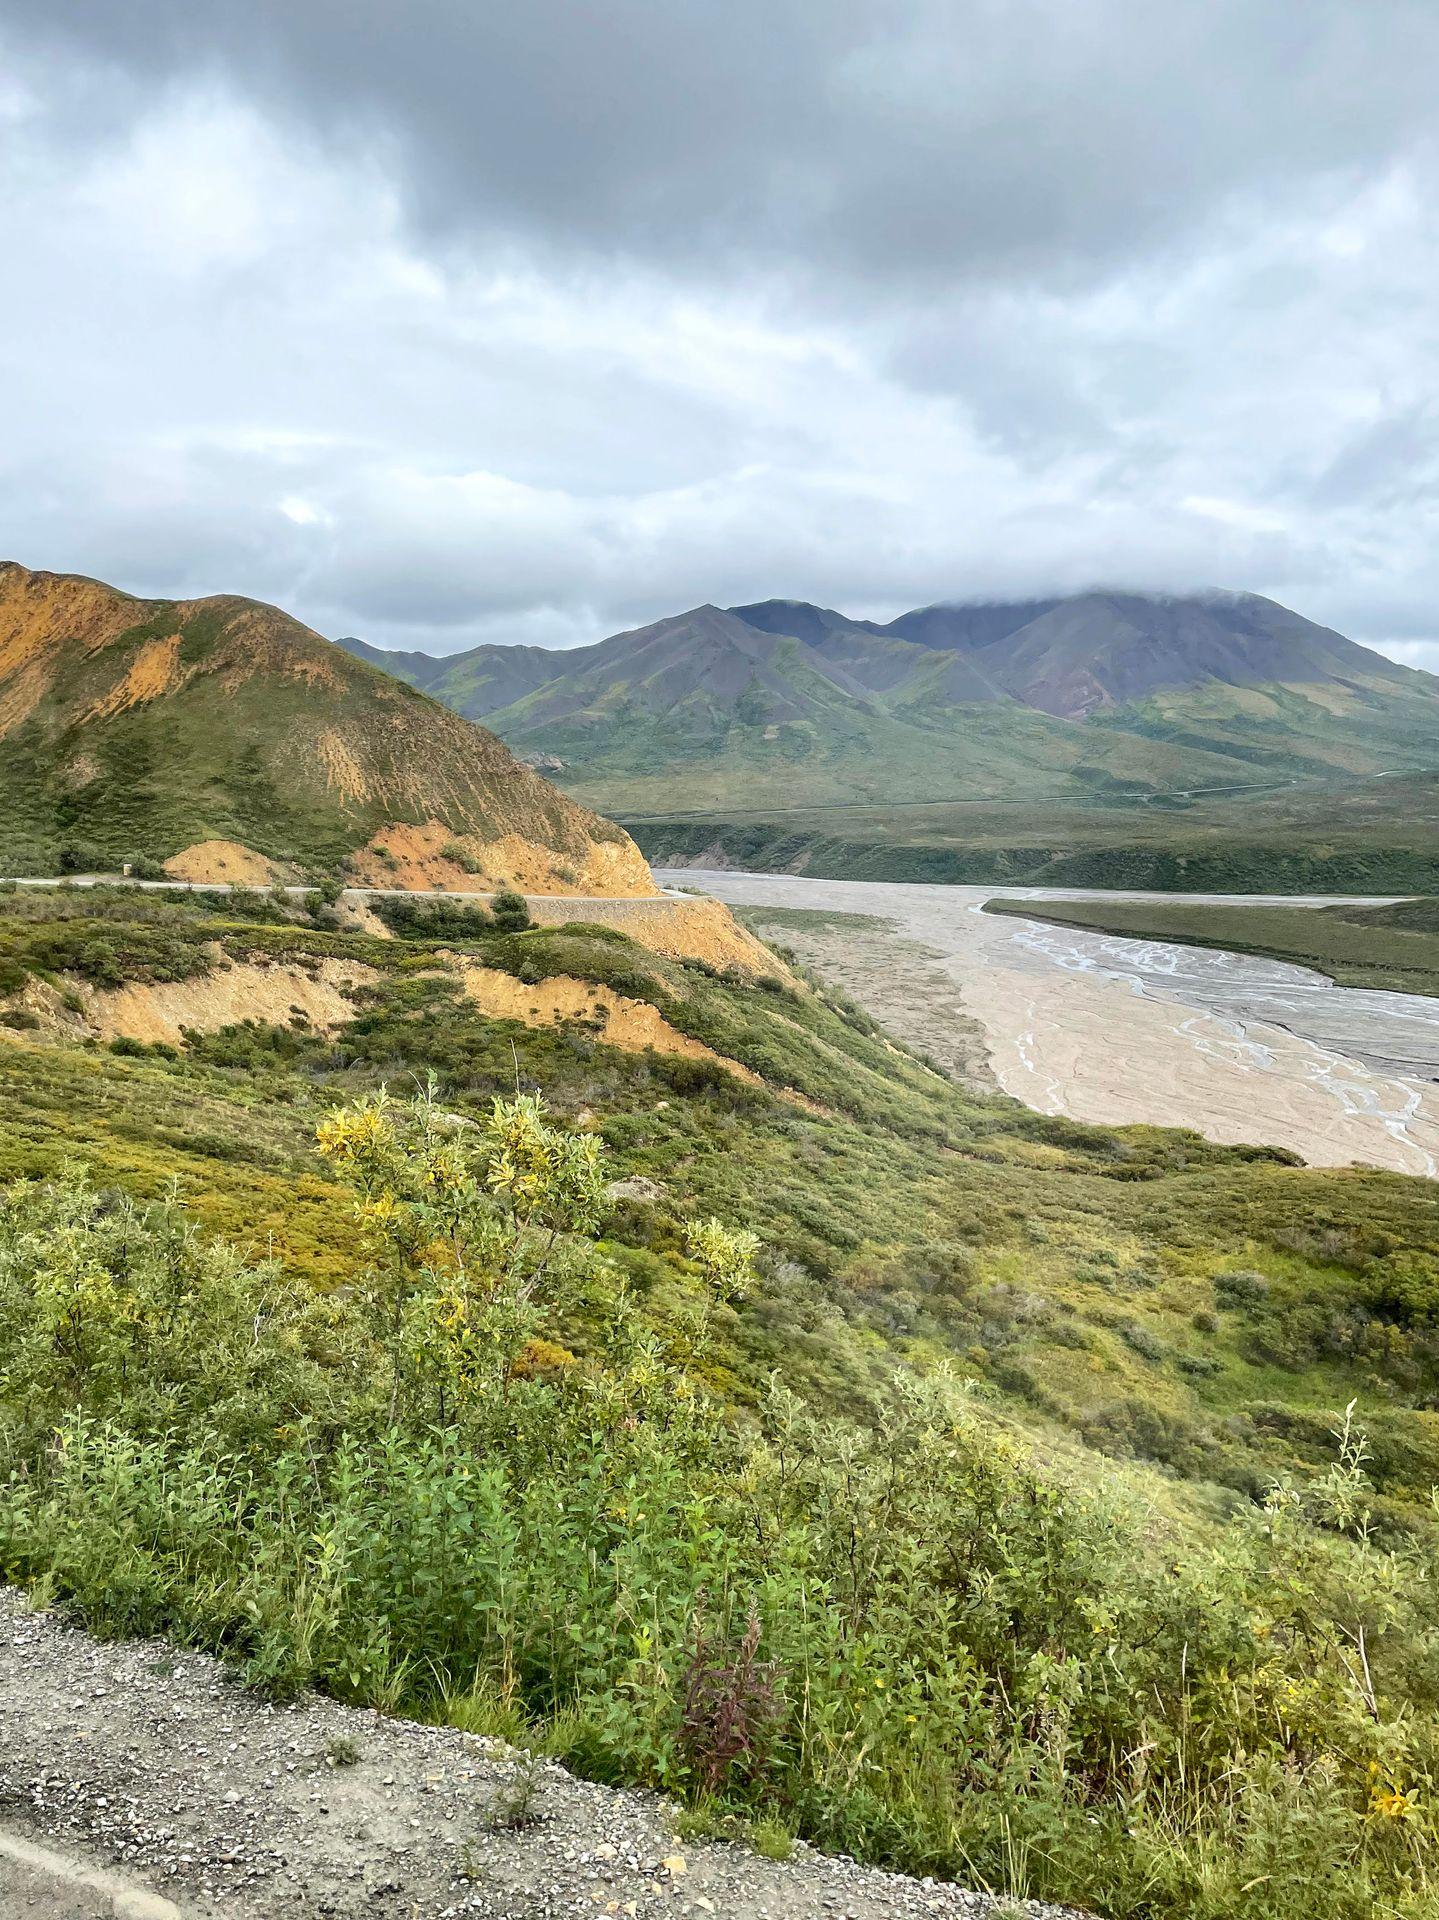 A view of mountains, greenery and the road through Denali National Park